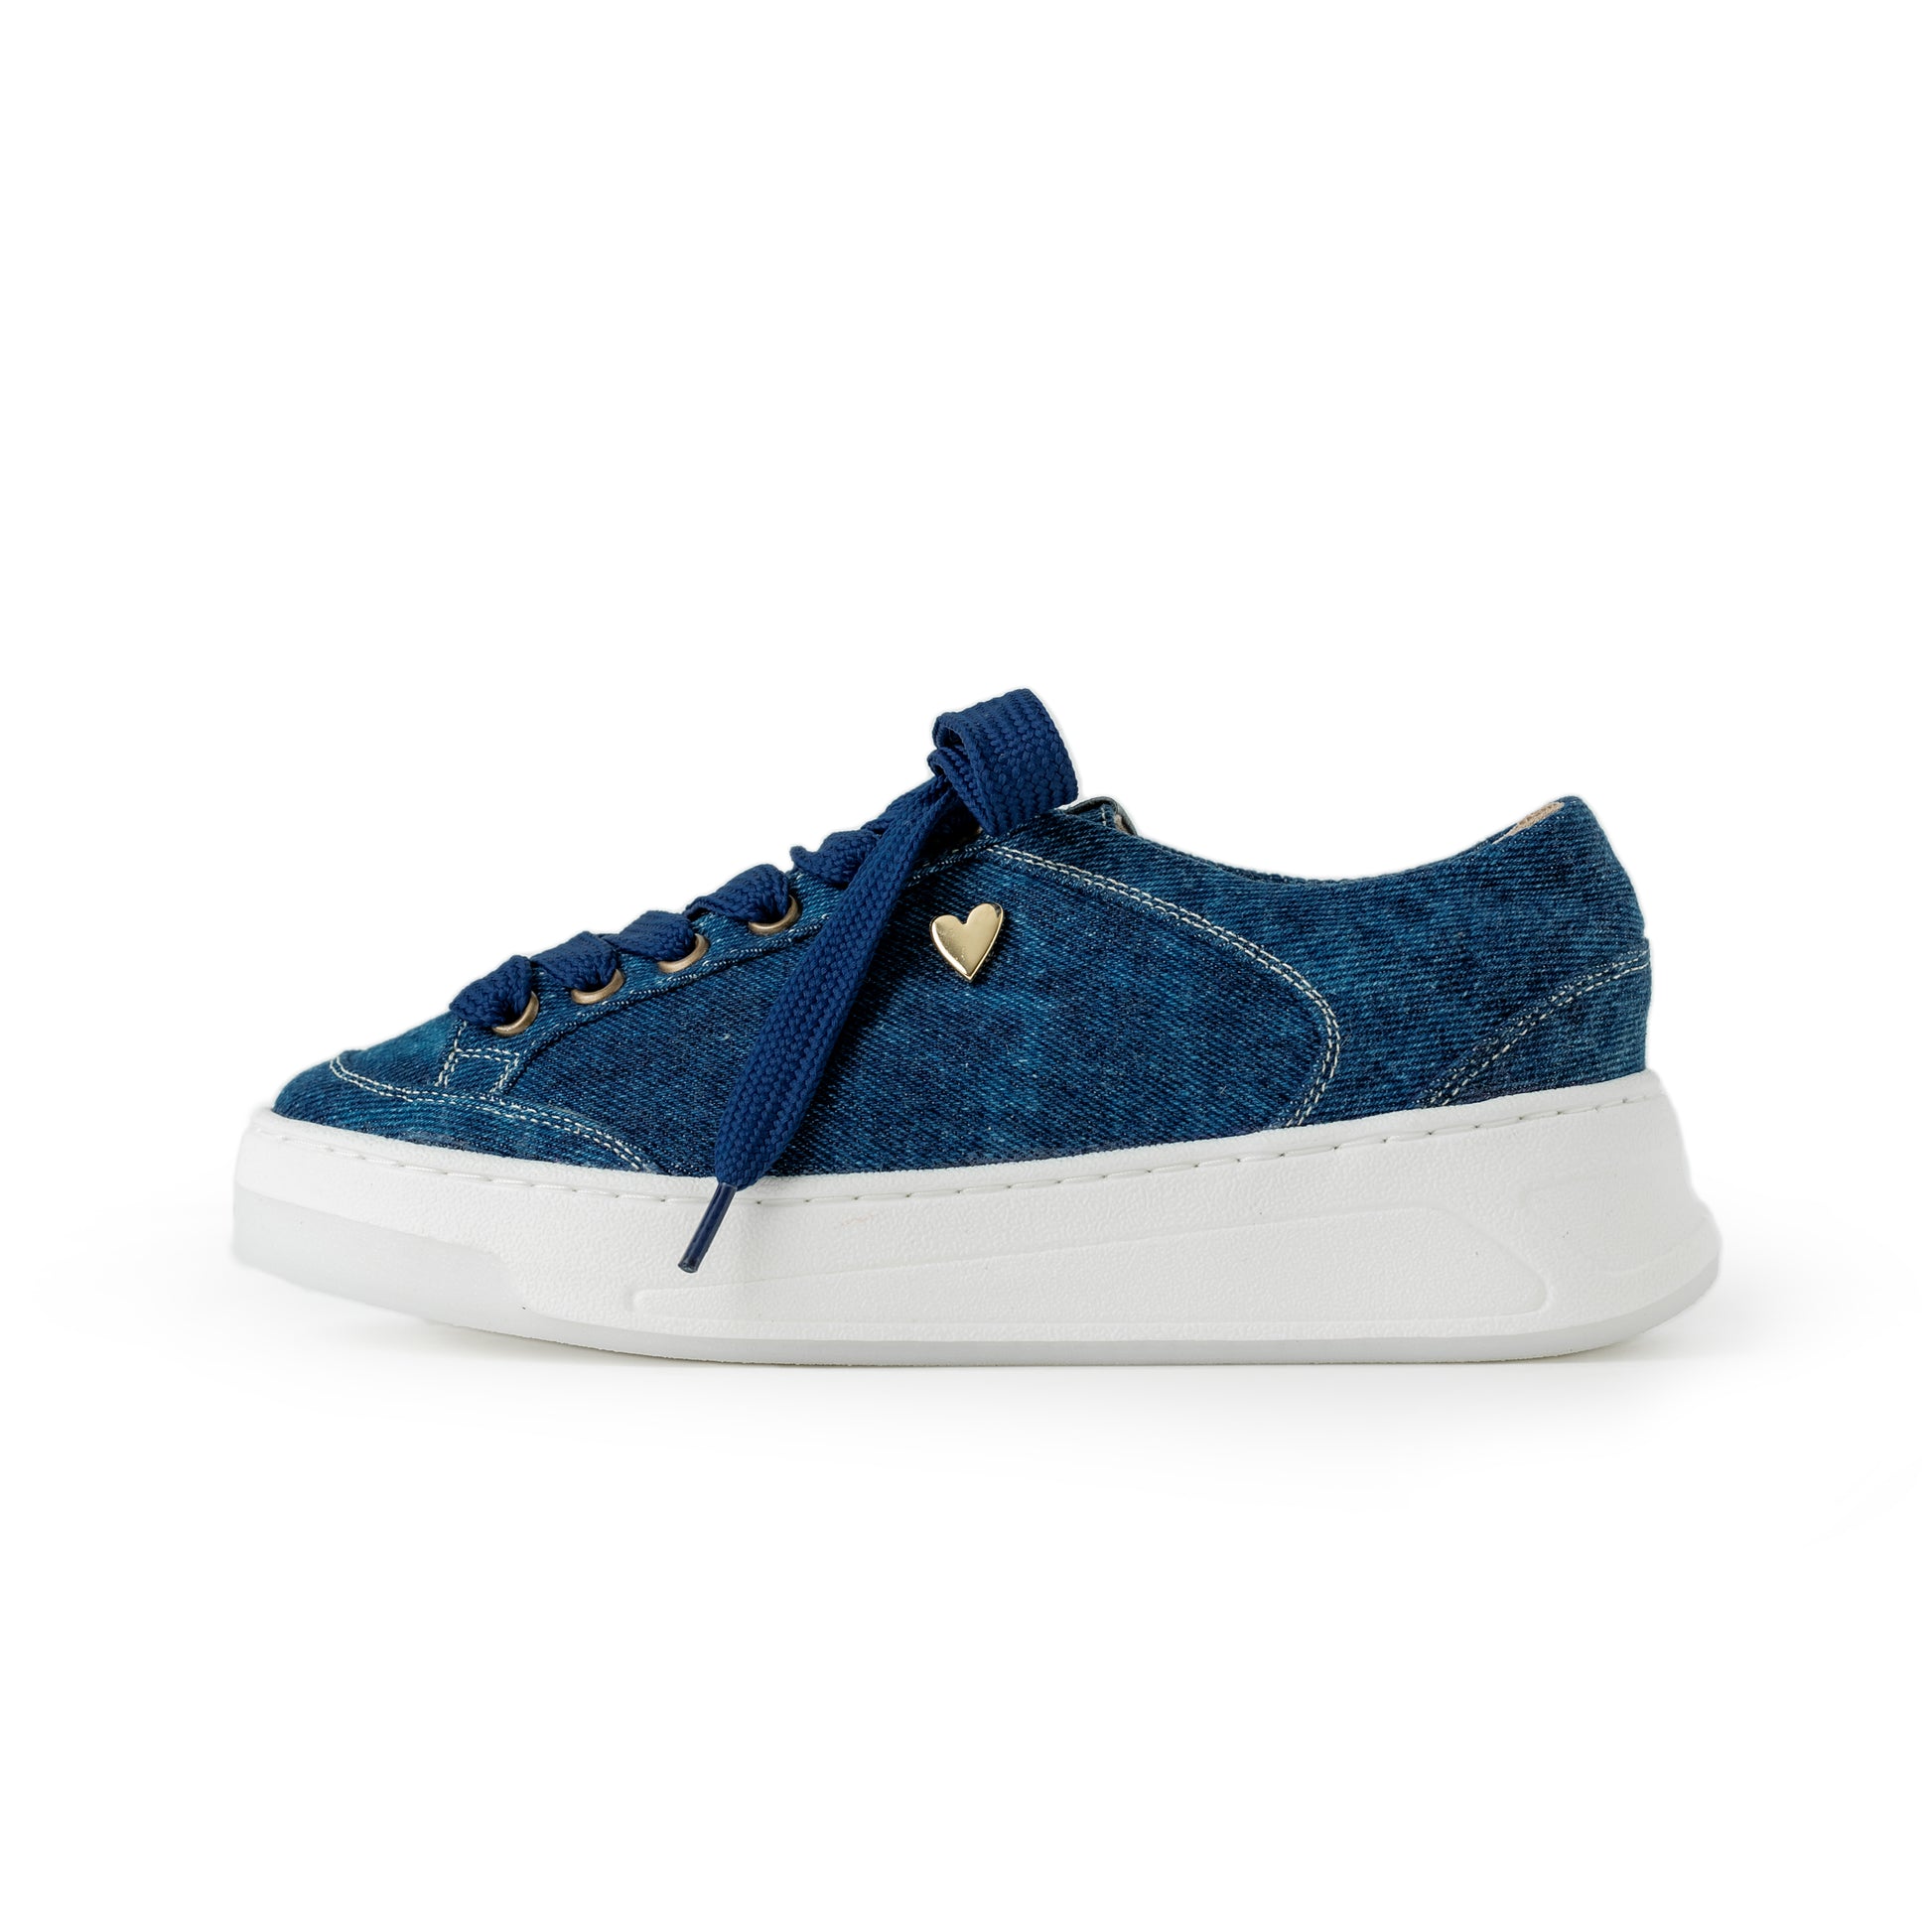 Krista Sneakers by Nataly Mendez Denim fabric upper material Genuine leather insole lining Rubber platform lining American sizes Flexible rubber outsole Handcrafted 1.5 inch heel height 1 inch platform